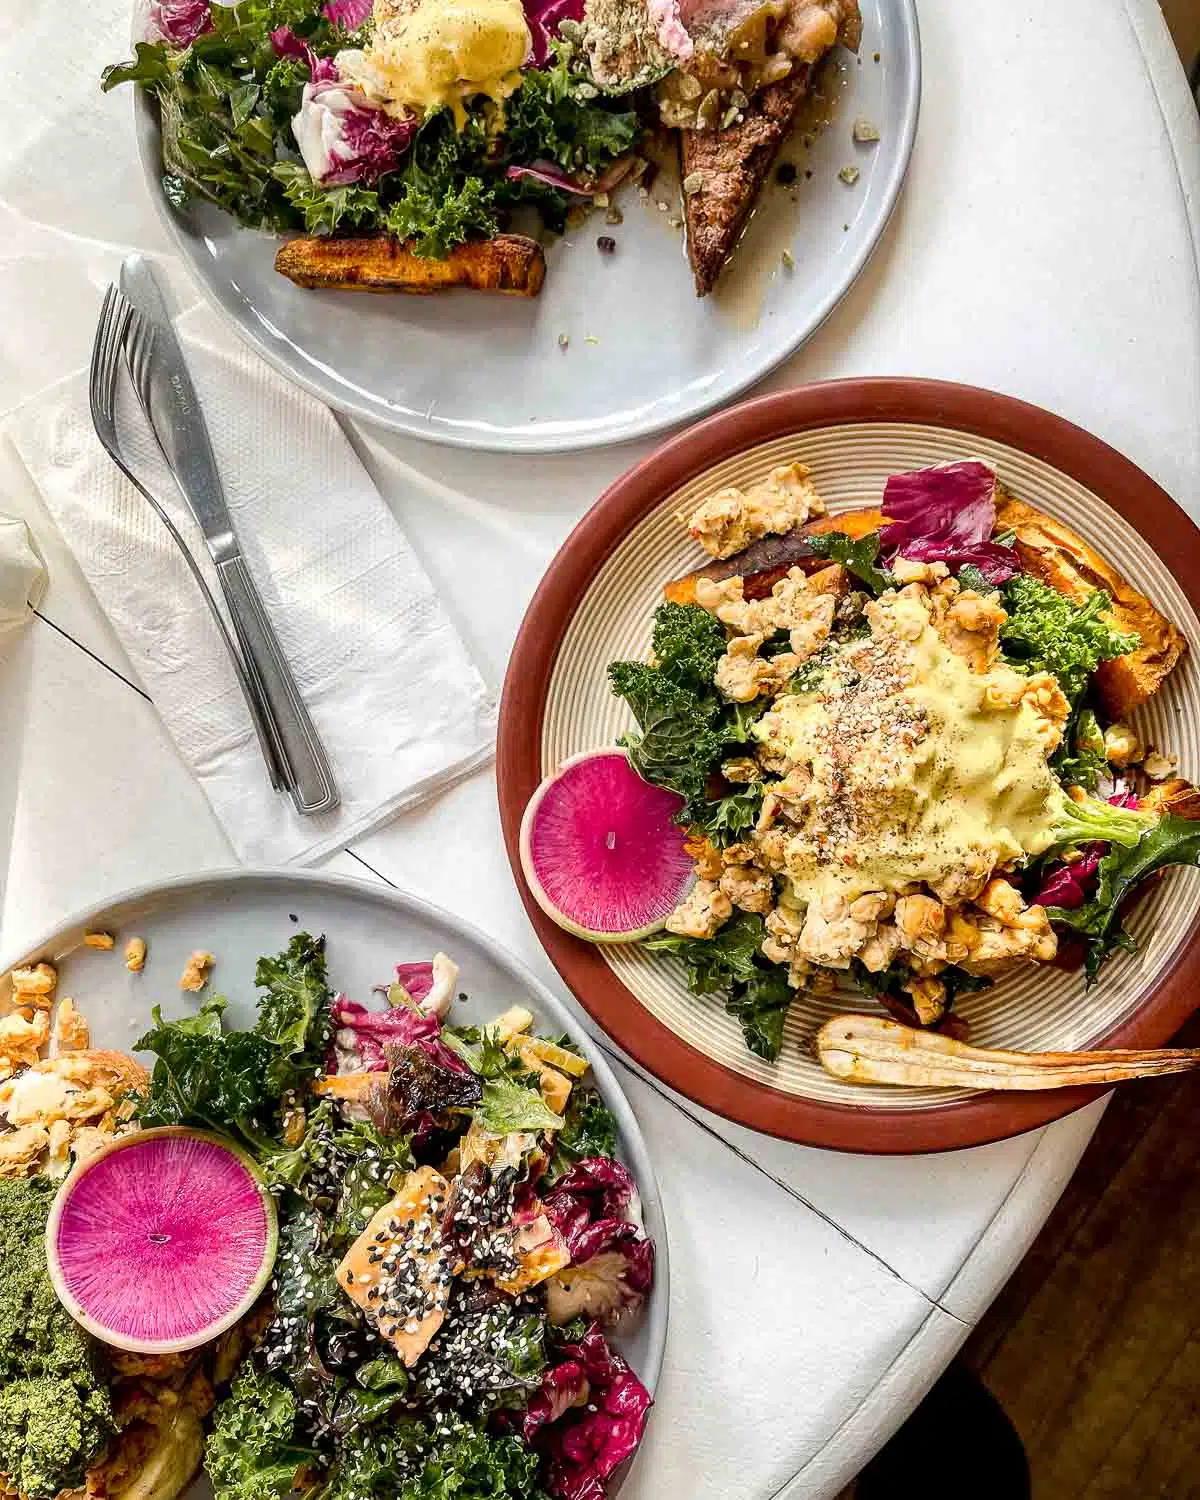 Colourful plates of food from Nourish Kitchen - best vegan restaurants in Victoria BC.